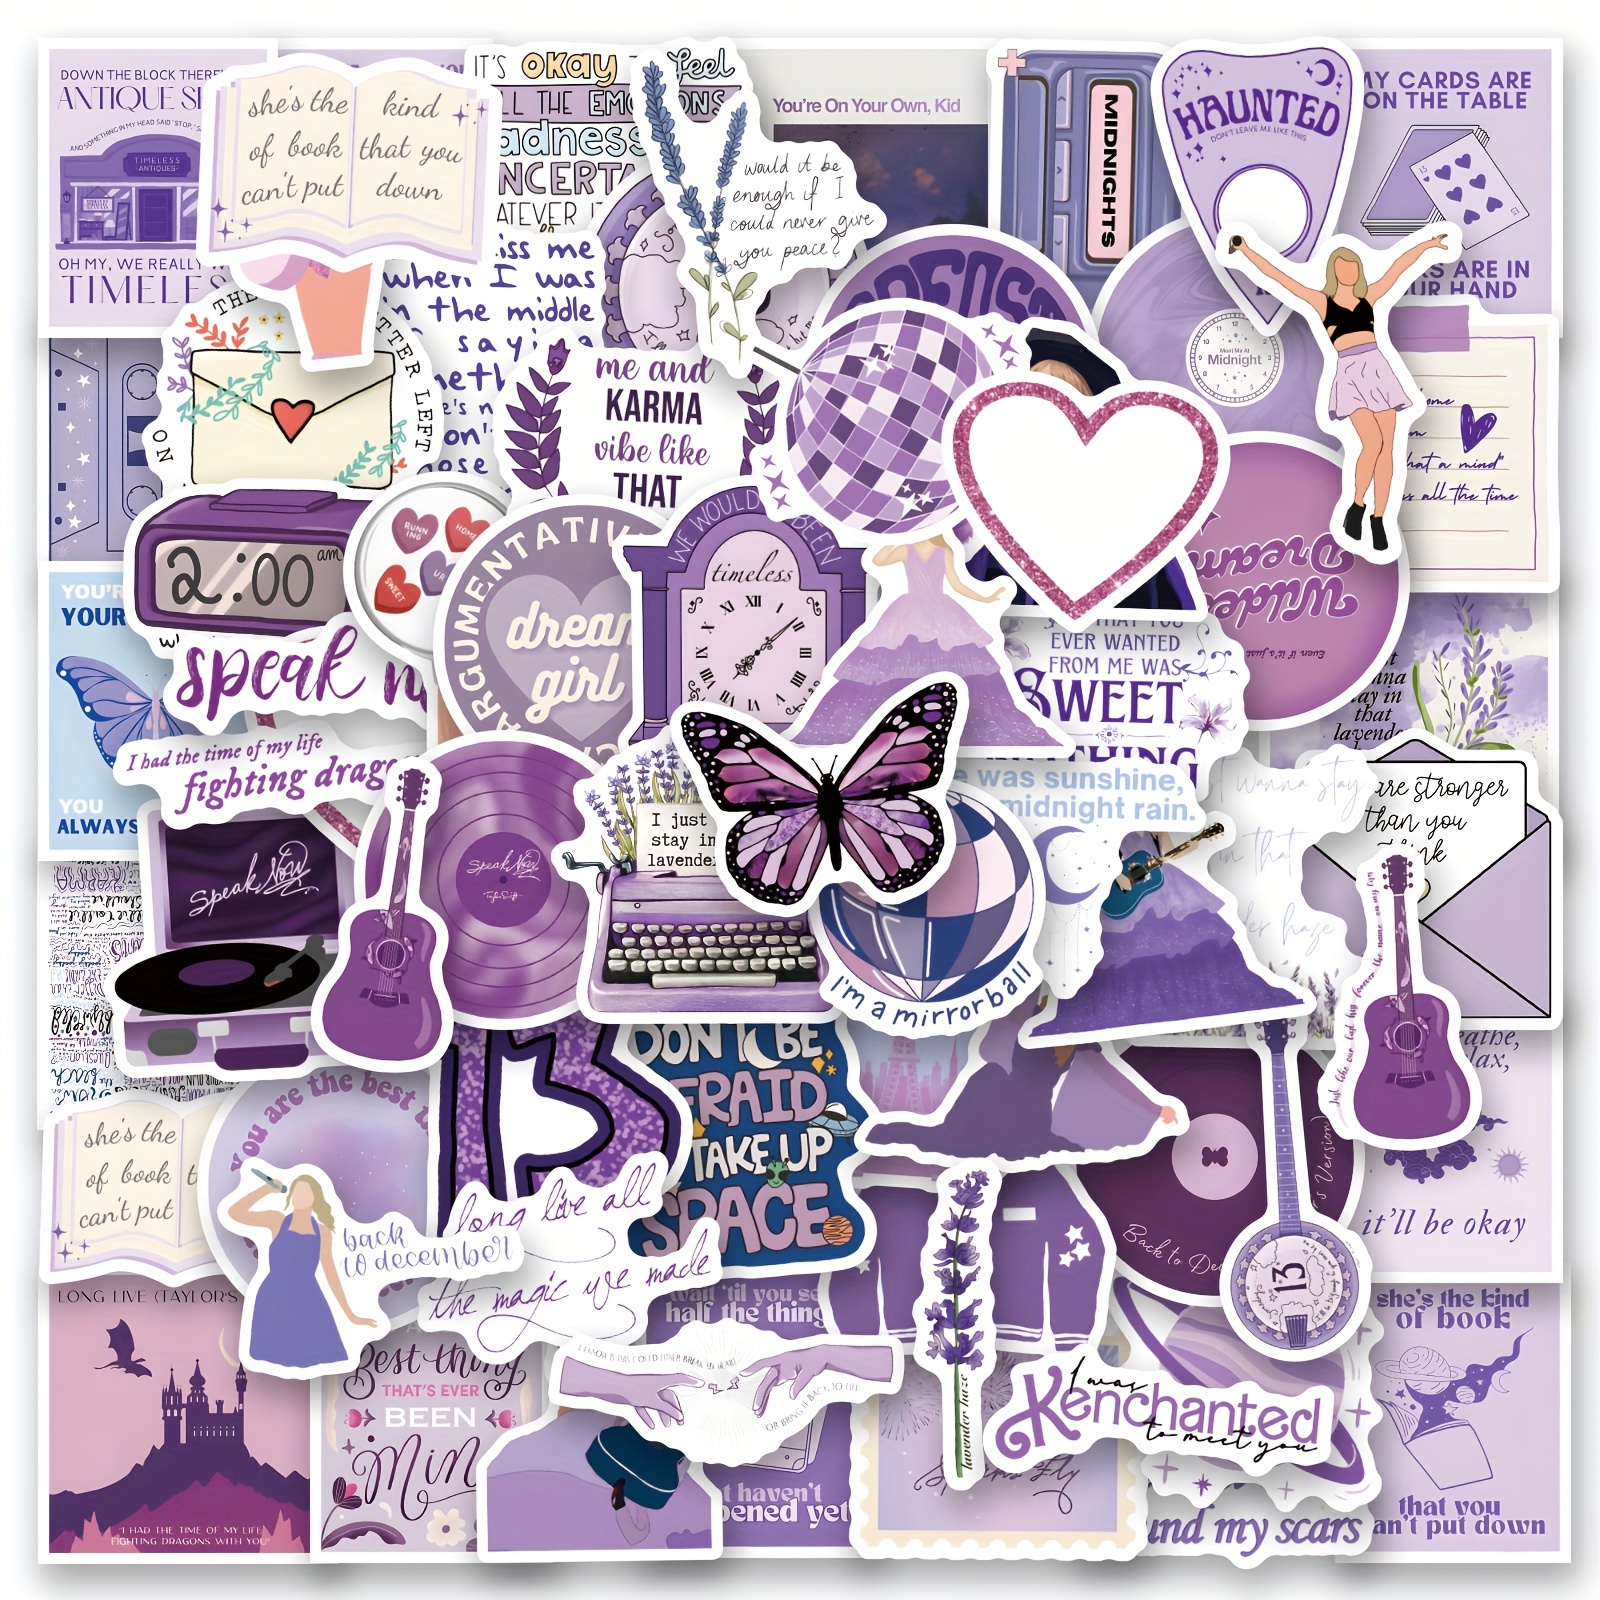  100PCS Swift-Themed Stickers - Waterproof Vinyl Stickers for  Water Bottle, Laptop, Skateboard, and Scrapbook - Ideal for Teens and Music  Lovers : Electronics